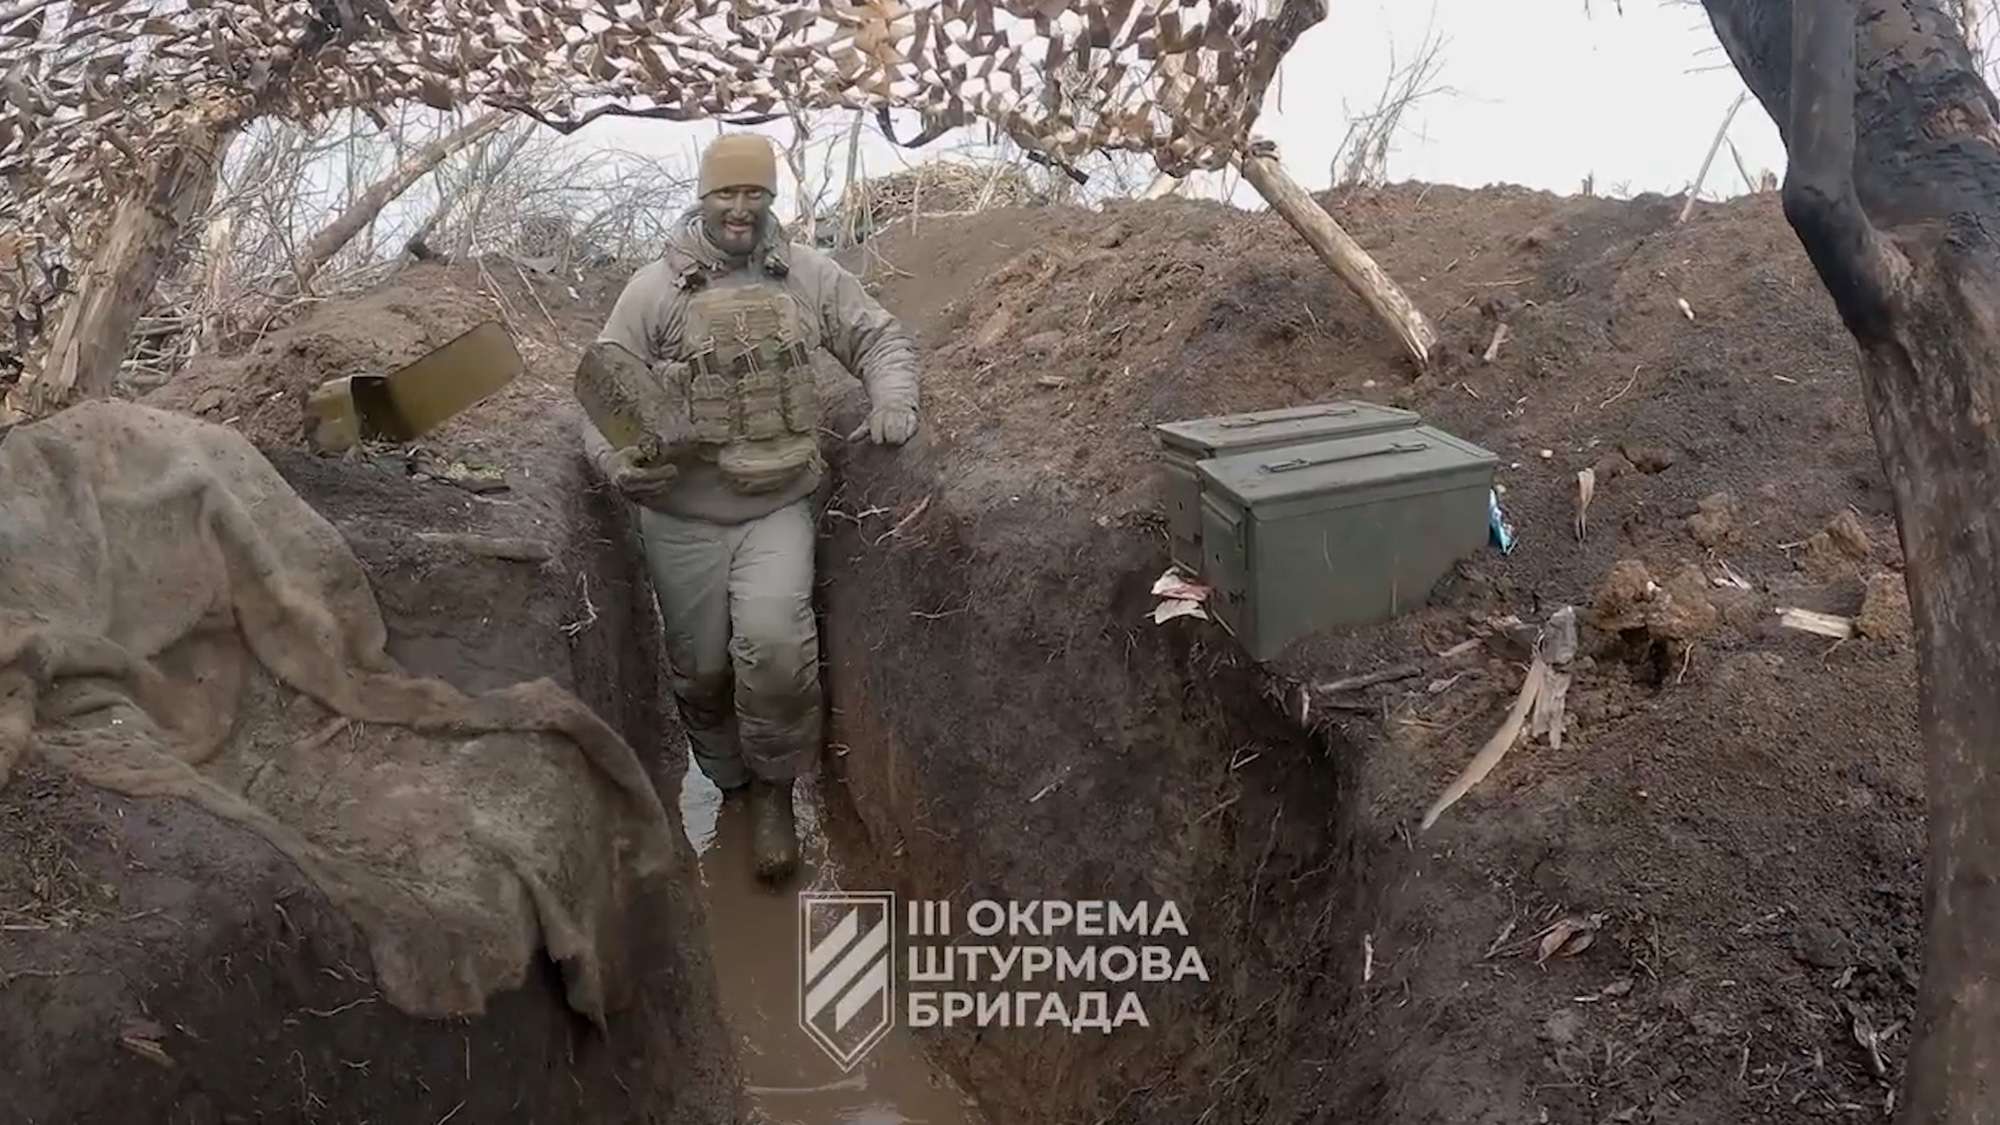 Read more about the article Ukrainian Troops Exchange Fire With Russians In Bakhmut Amid Ruined Homes And Waterlogged Trenches